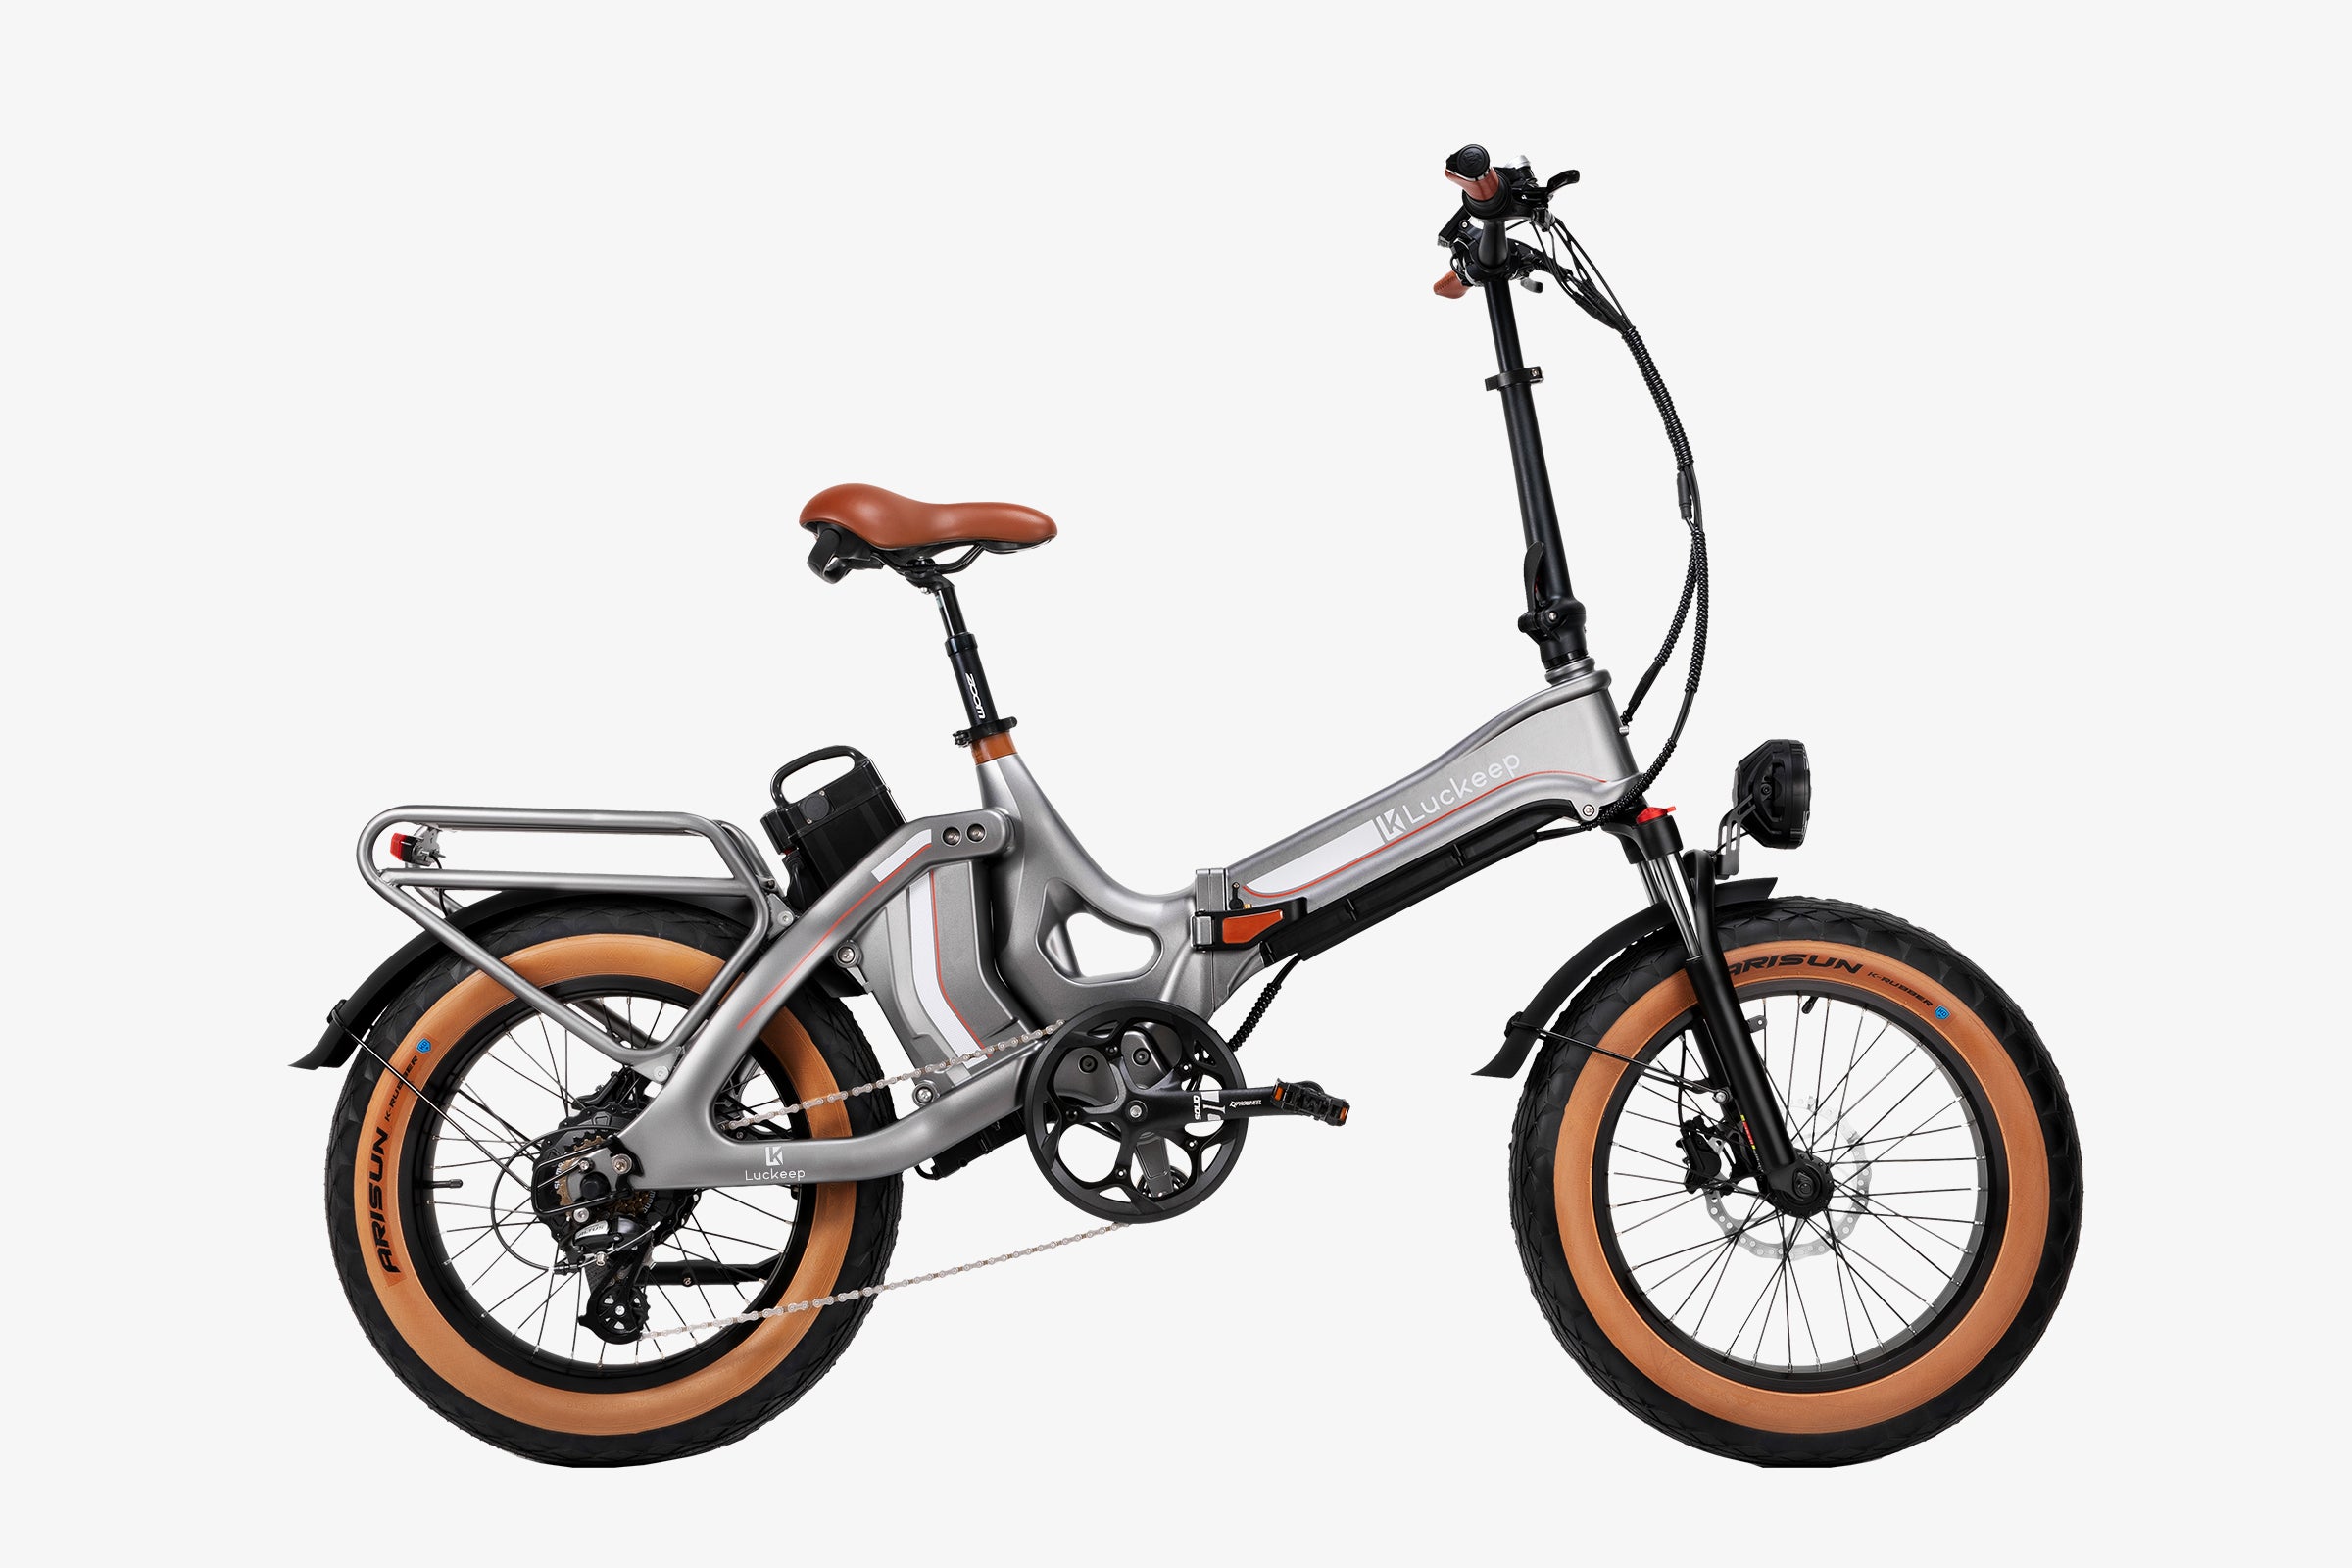 Luckeep X1 Pro Foldable 20" Fat Tire Electric Bike For Sale